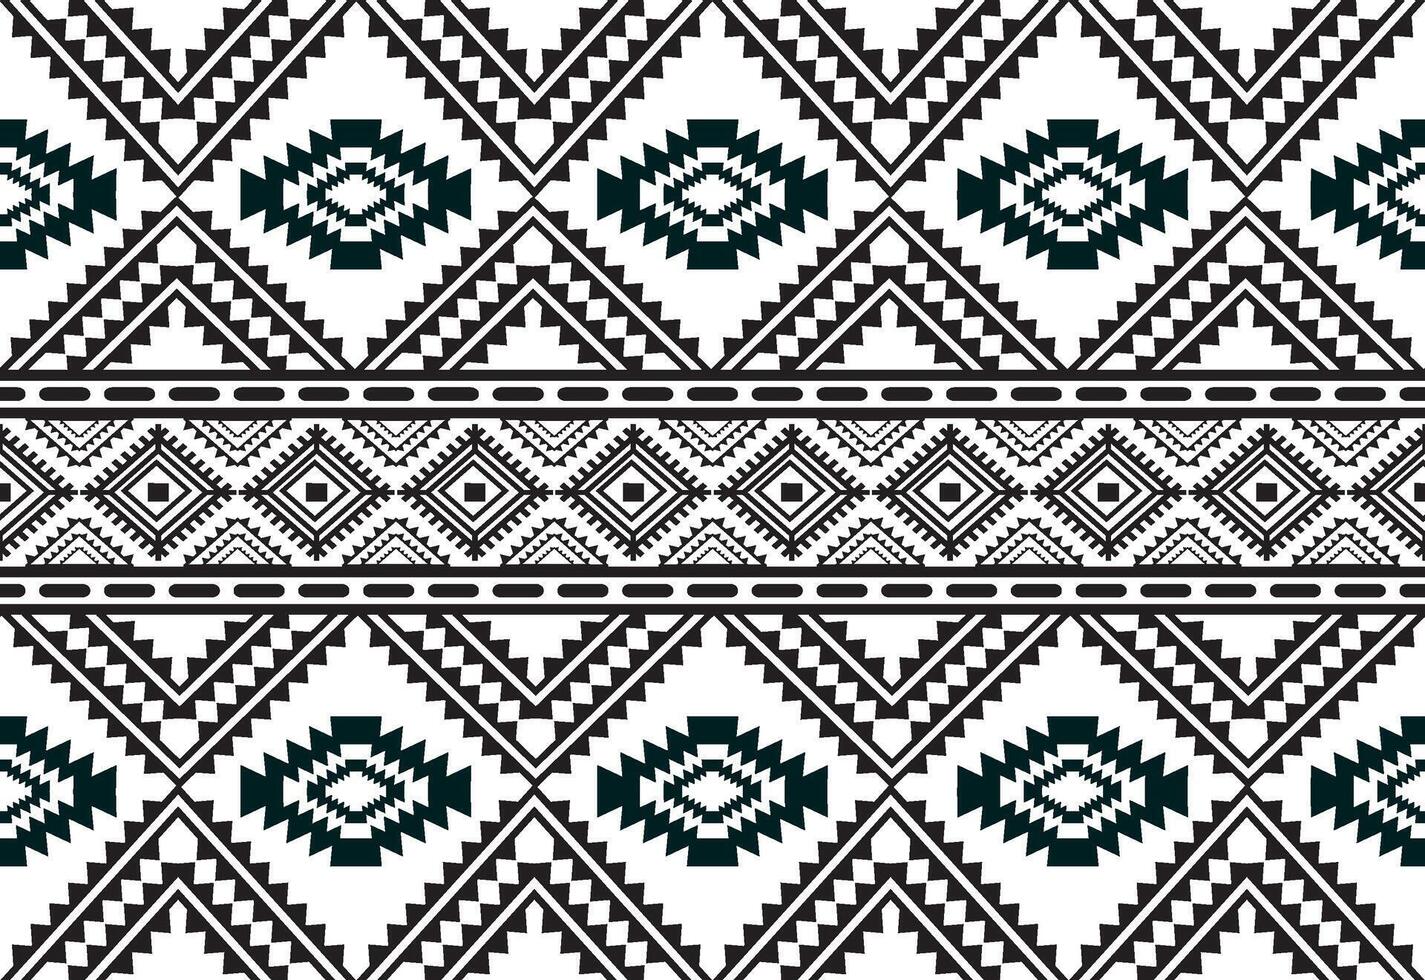 Tribal traditional fabric batik ethnic. ikat seamless pattern leaves geometric repeating Design for wallpaper, wrapping, fashion, carpet, clothing. Black and white vector